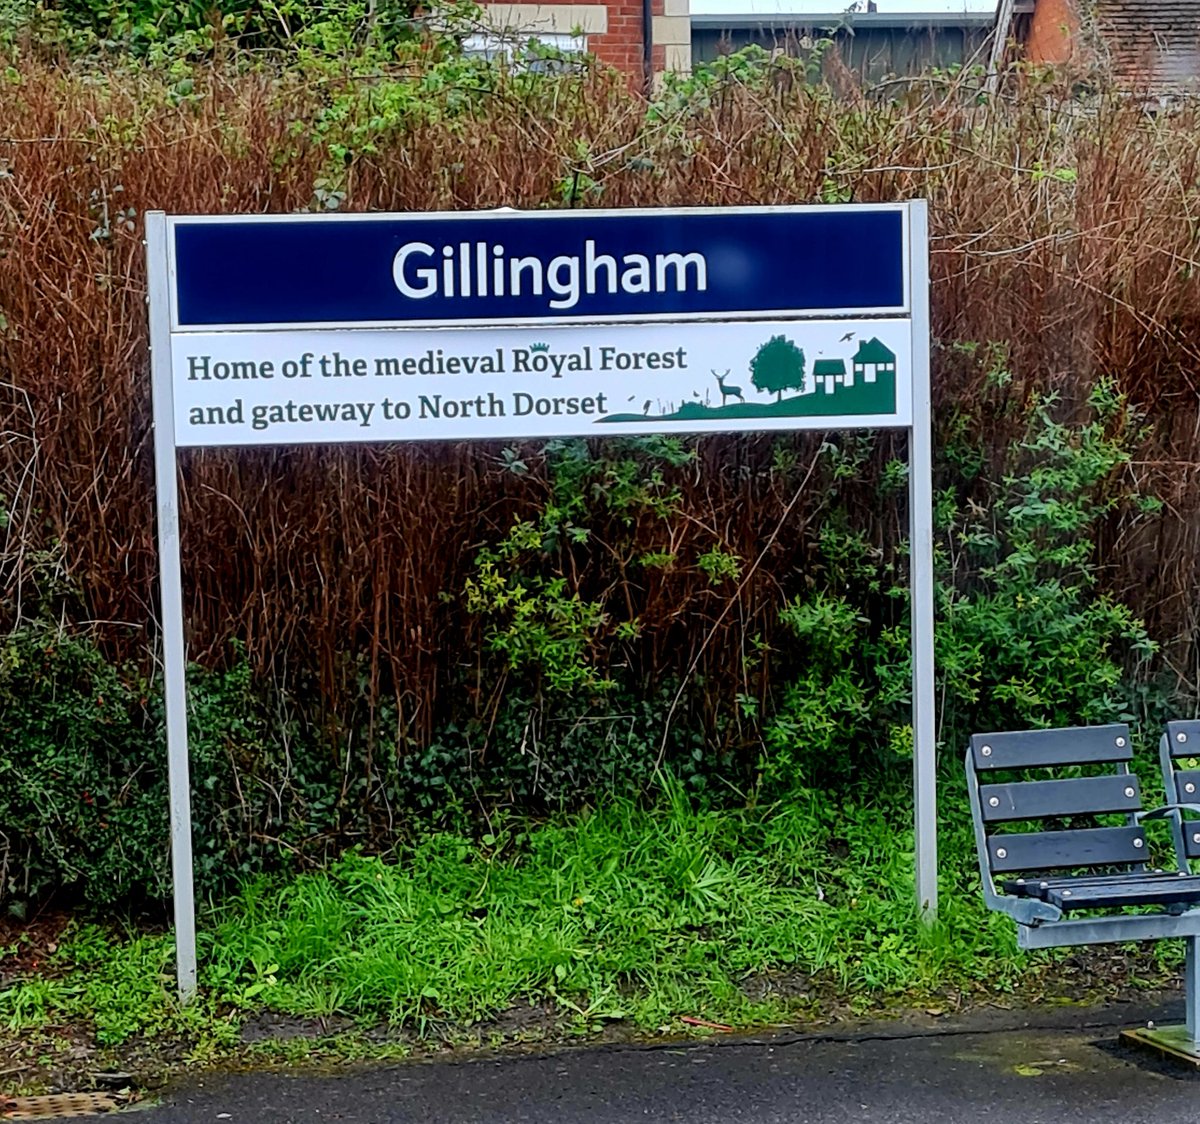 Great to see new signs at Gillingham promoting the landscape of the medieval Royal Forest. Come and explore. FREE Walks packs available with all routes starting from the station.